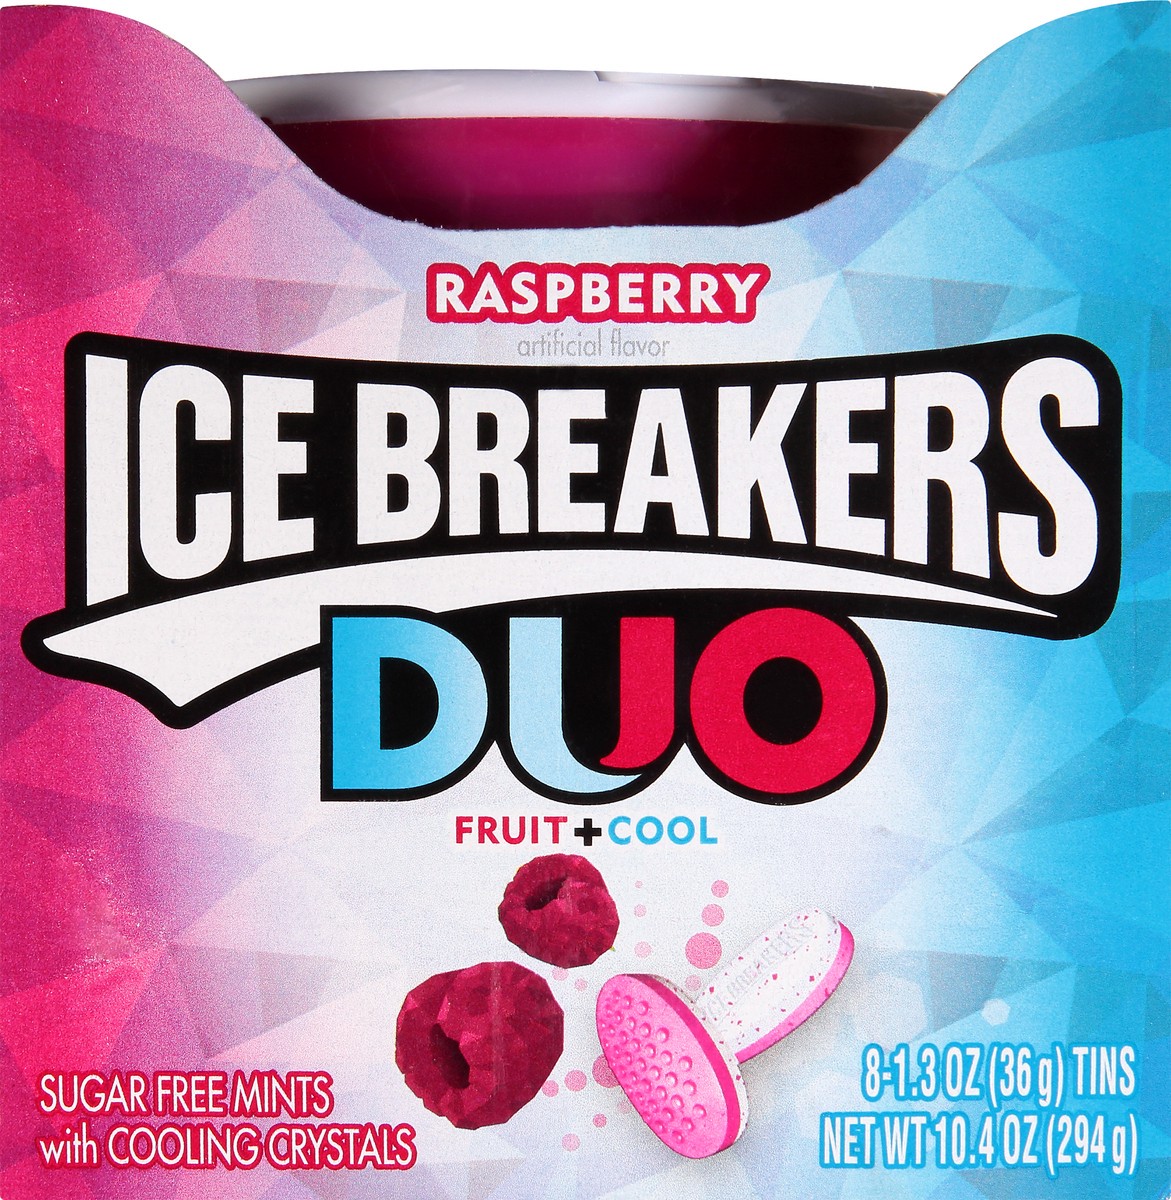 slide 7 of 10, Ice Breakers Duo Sugar Free Fruit + Cool Fruit+ Cool Raspberry Mints with Flavor Crystals 8 - 1.3 oz Tins, 1.3 oz